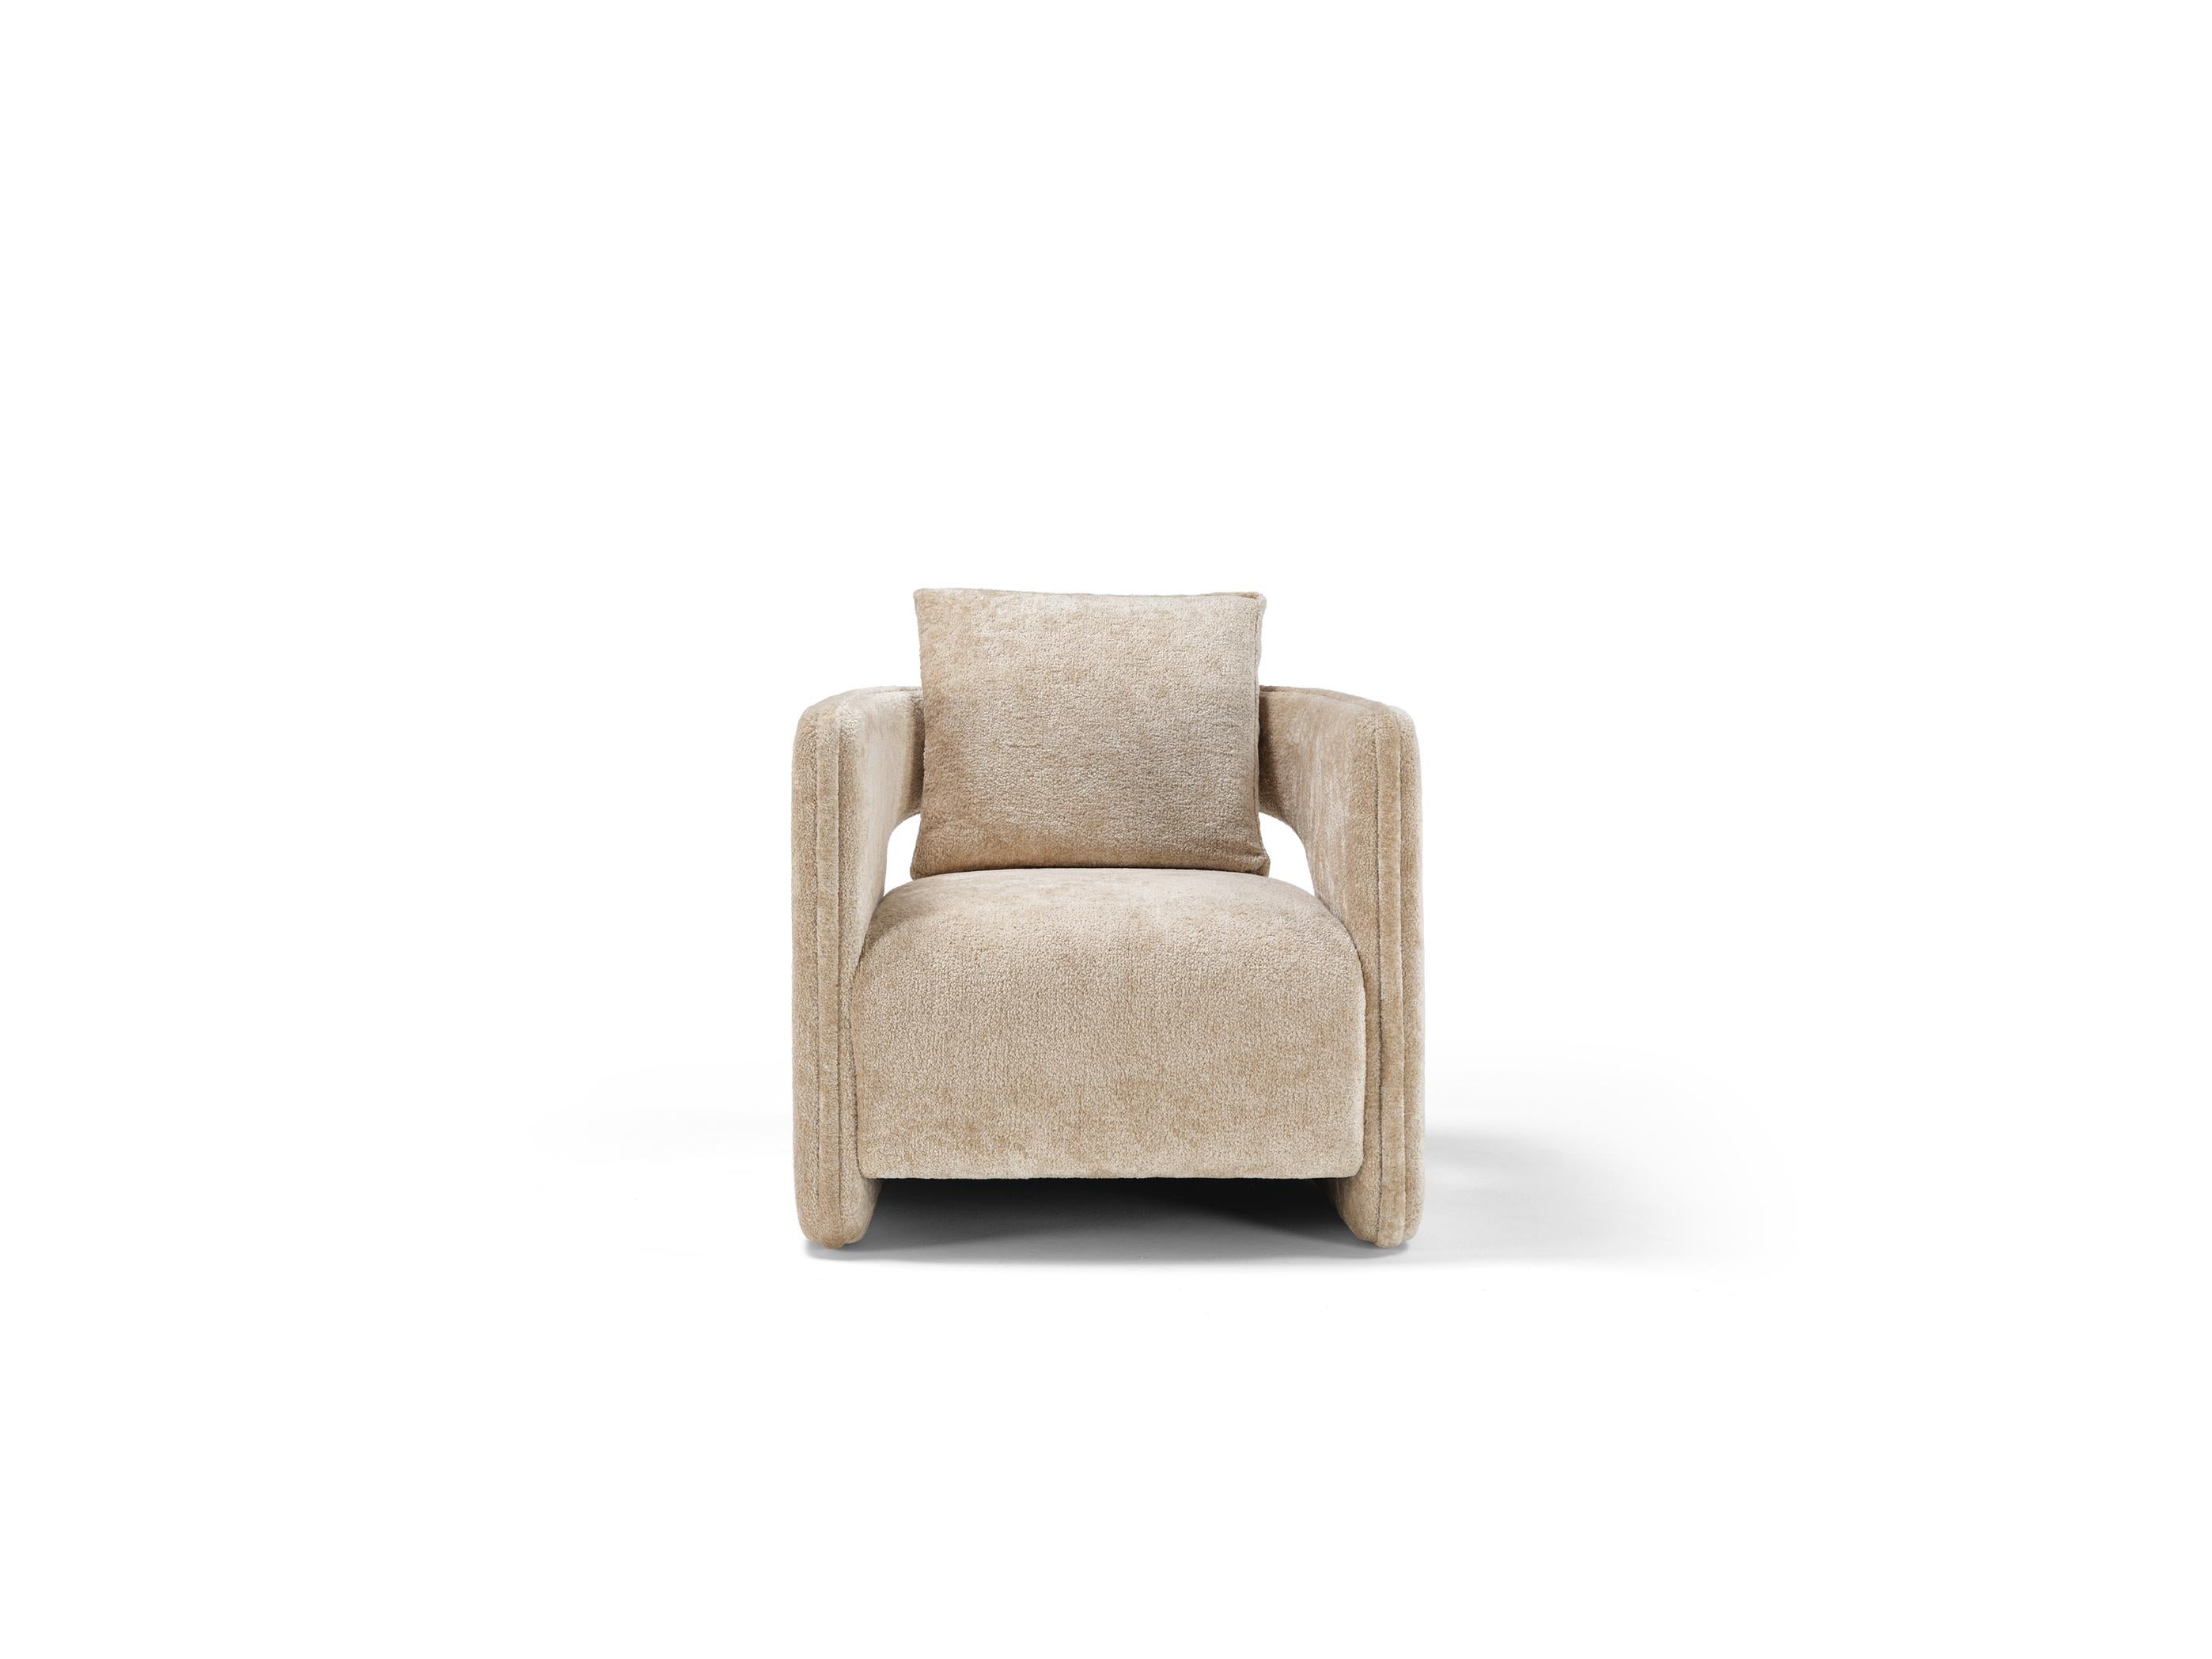 LEWIS’ modern and consensual design makes it the perfect armchair for any room. It can be upholstered in contrasting fabrics for a bolder result or using the same fabric for classic styles.
Lewis will stand out in your living room, bedroom, office